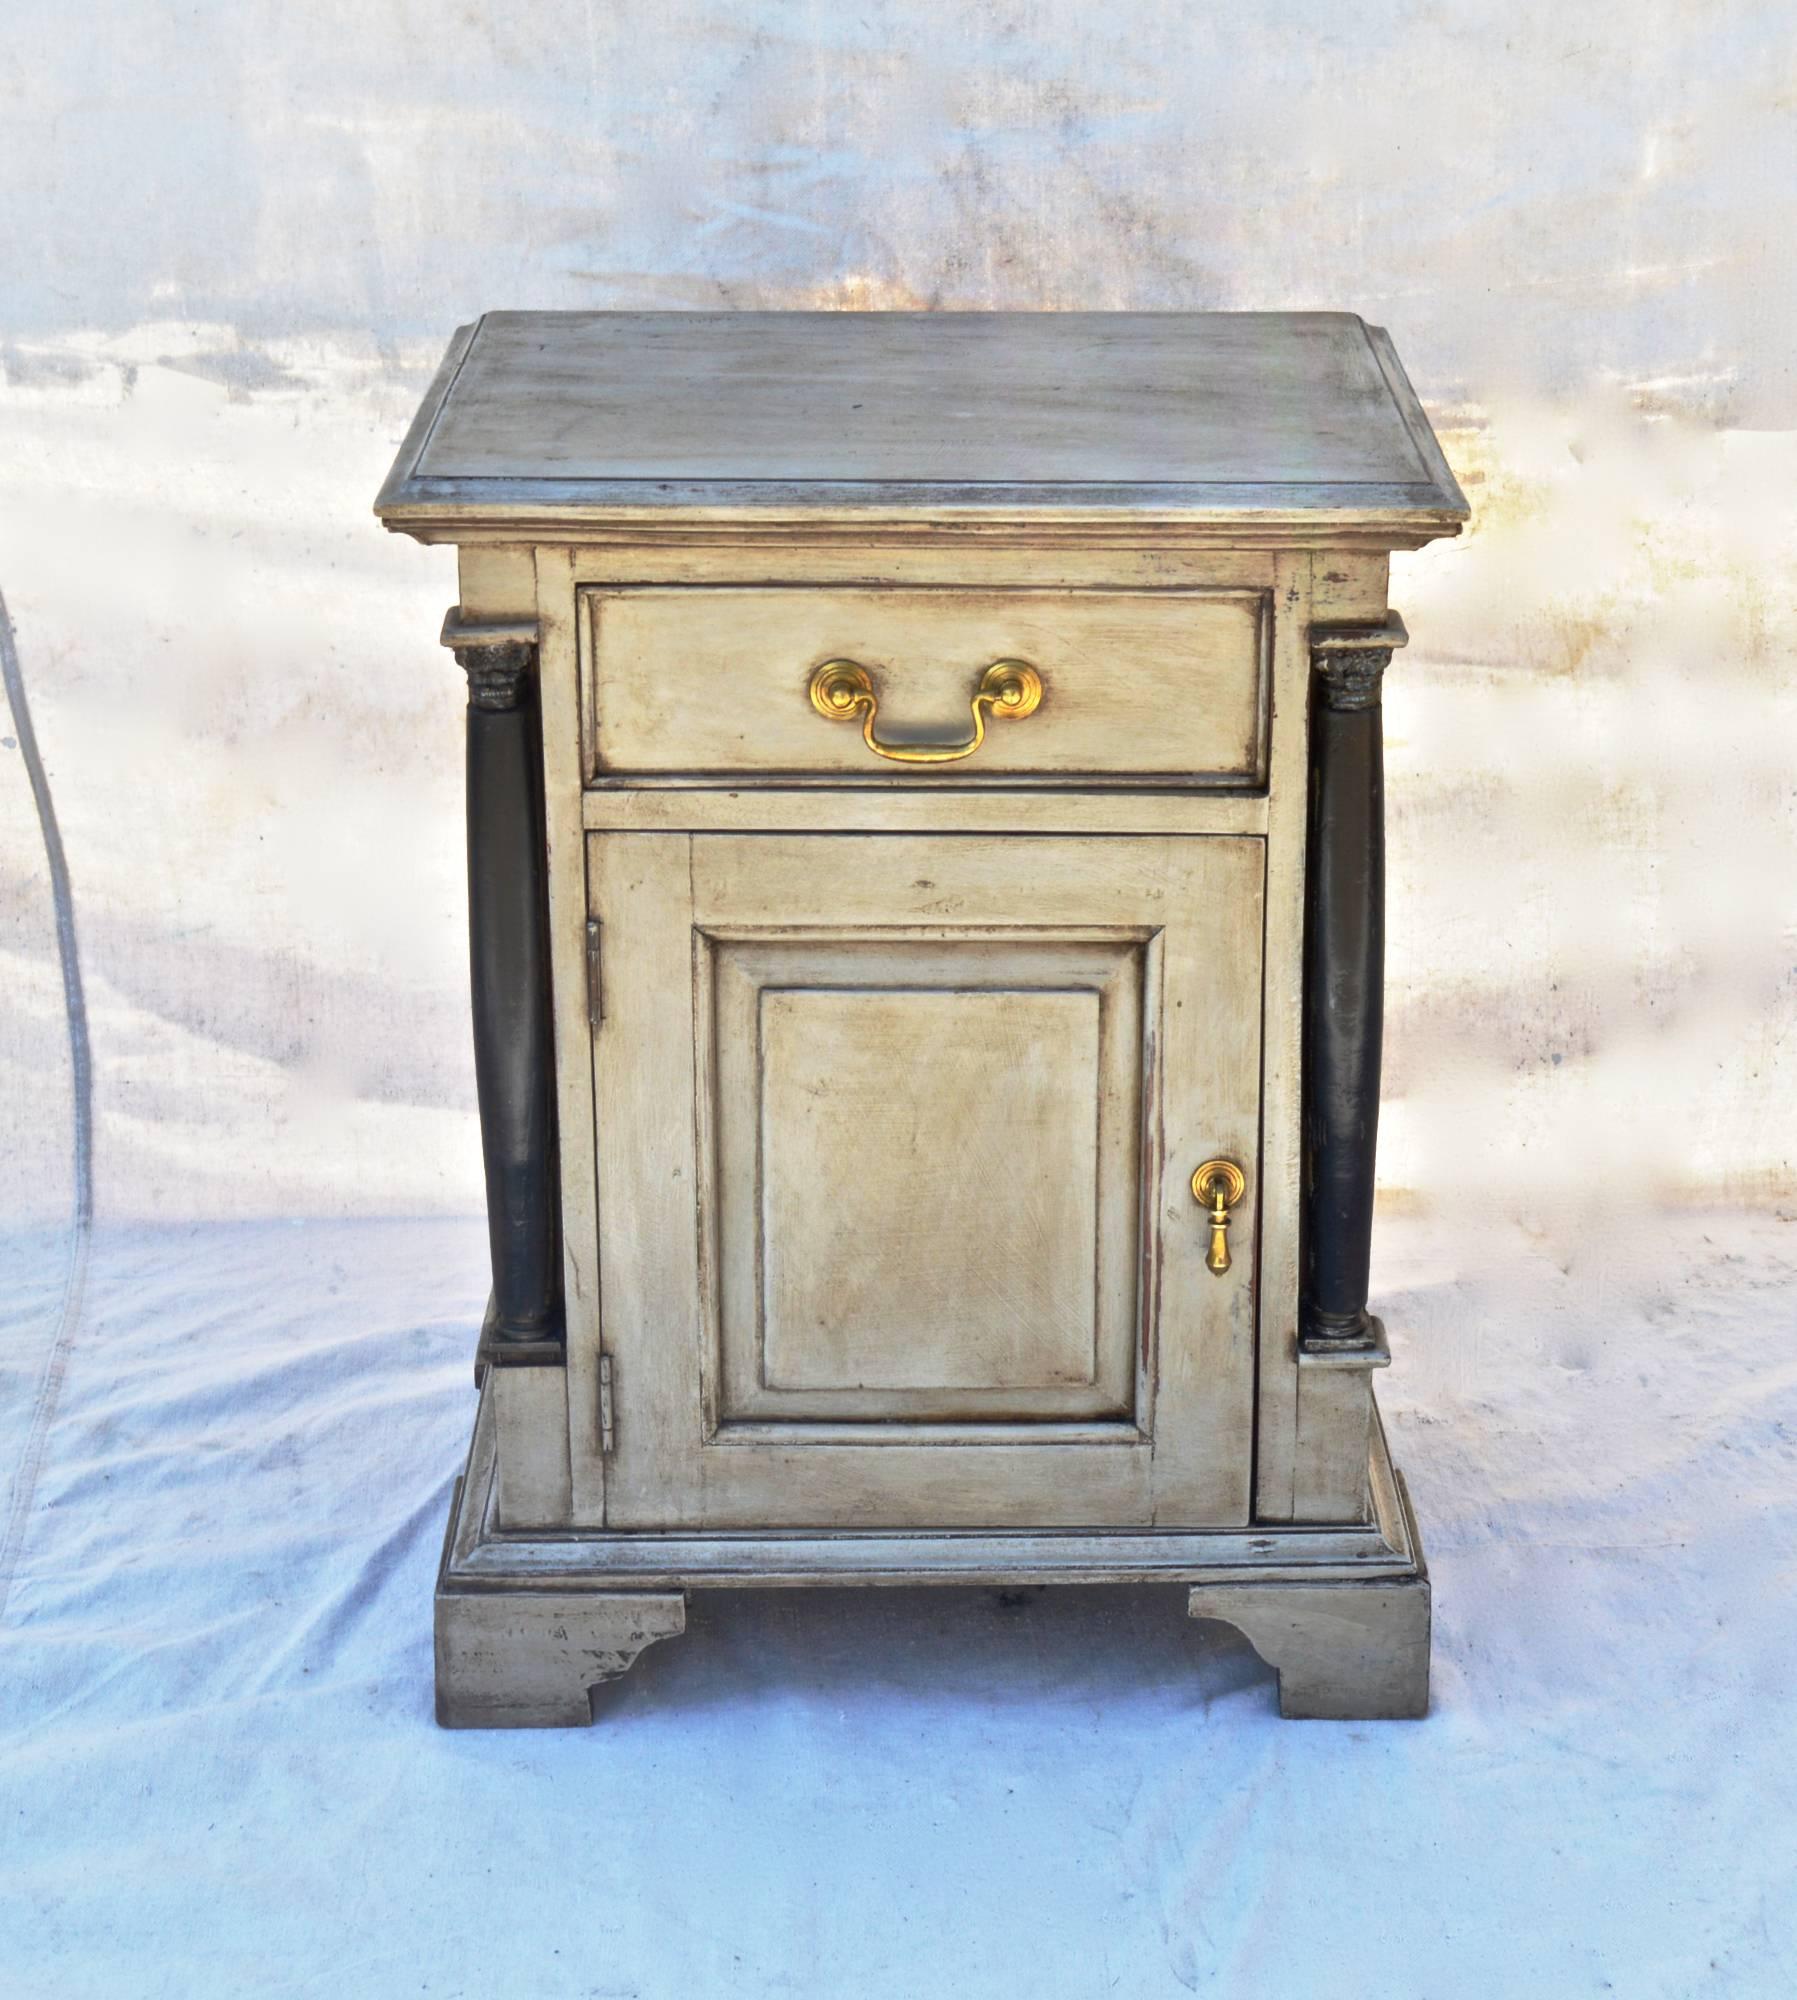 Early 20th Century Continental nightstand having a French washed paint finish. The single drawer is opened by a finely cast bail pull. A matching teardrop pull opens the swinging door to the storage space below. Paneled sides and back. A useful and